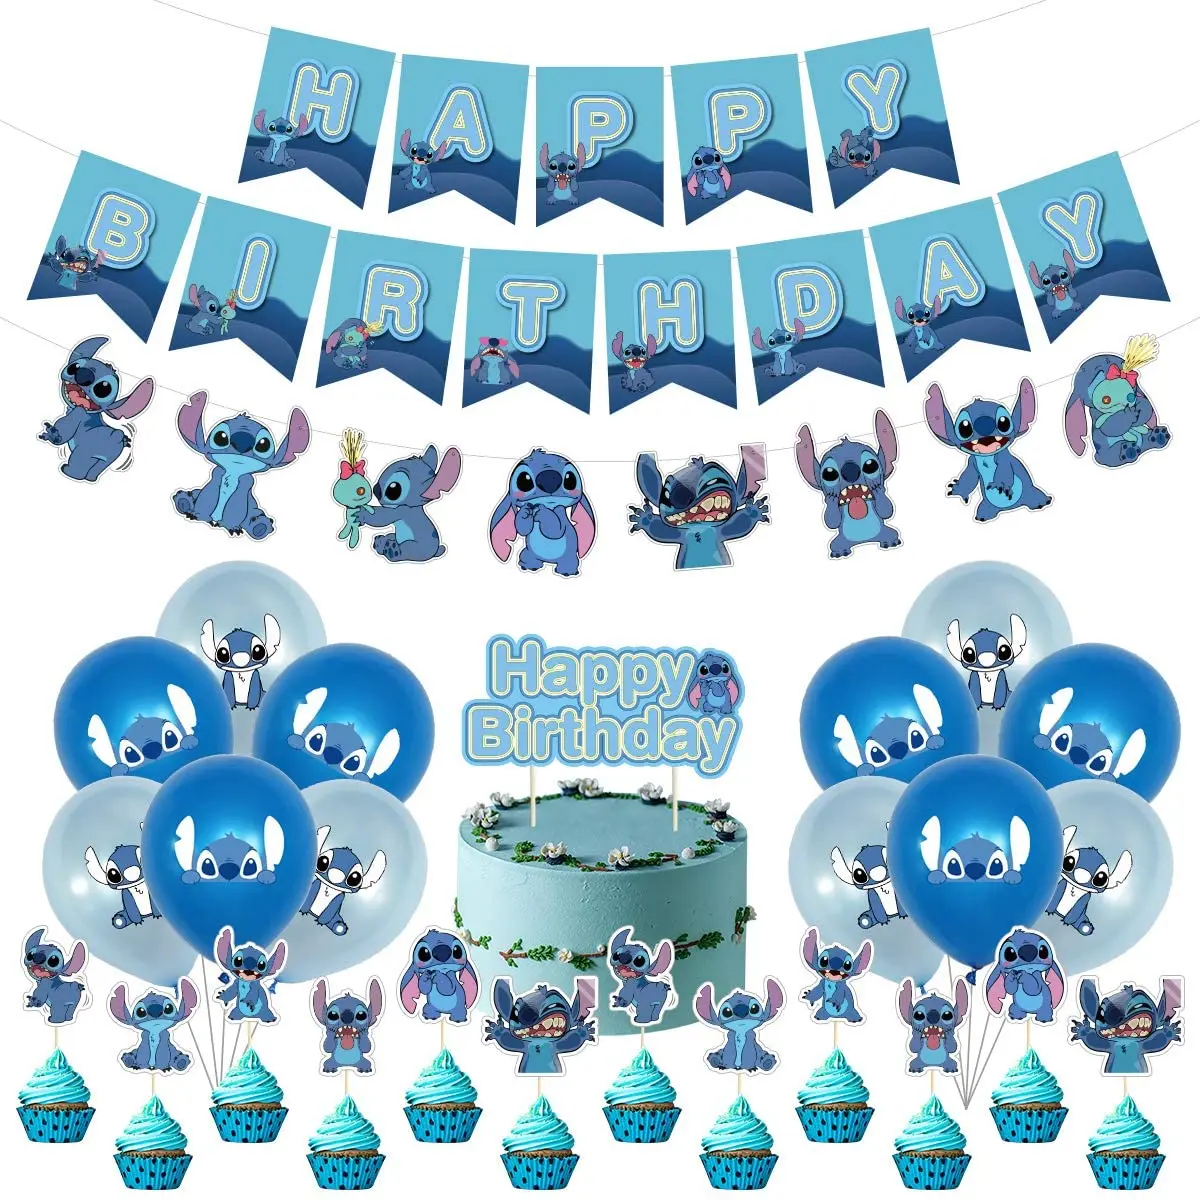 Buy Lilo And Stitch Party Decoration Happy Birthday Party Supplies Boys Birthday  Decoration from Quanzhou Wantwell Information & Technology Co., Ltd., China